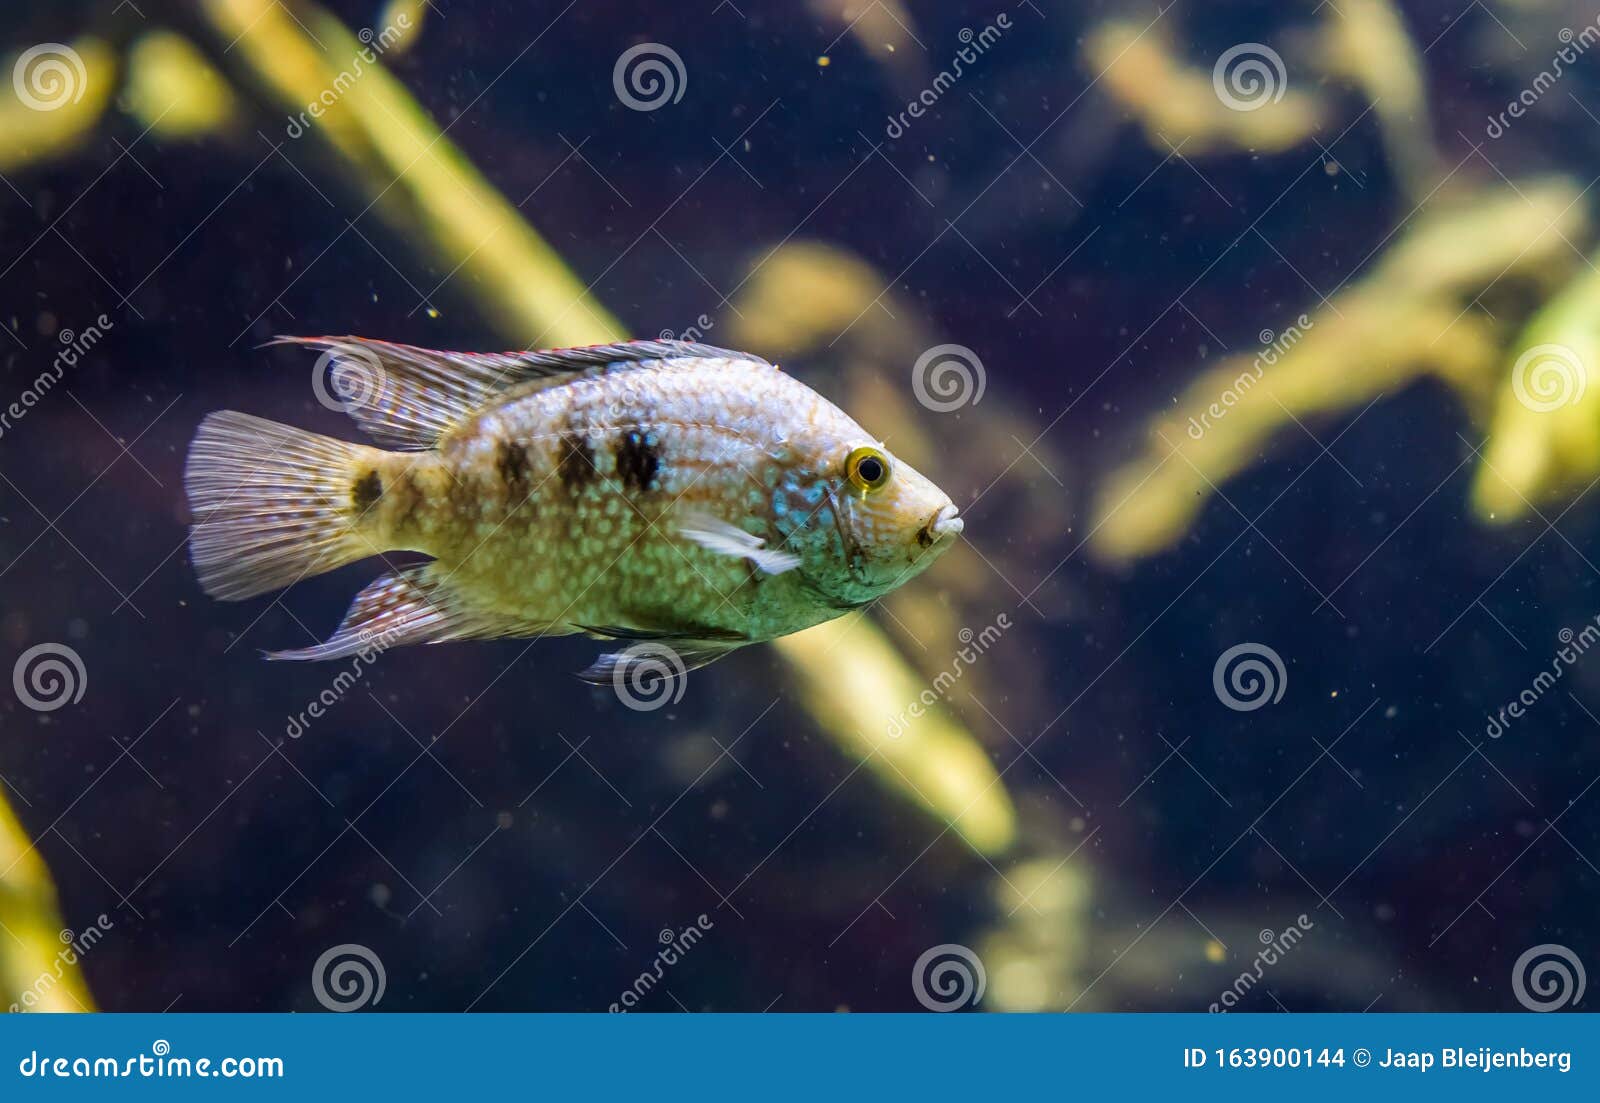 Pearl Cichlid Photos Free Royalty Free Stock Photos From Dreamstime